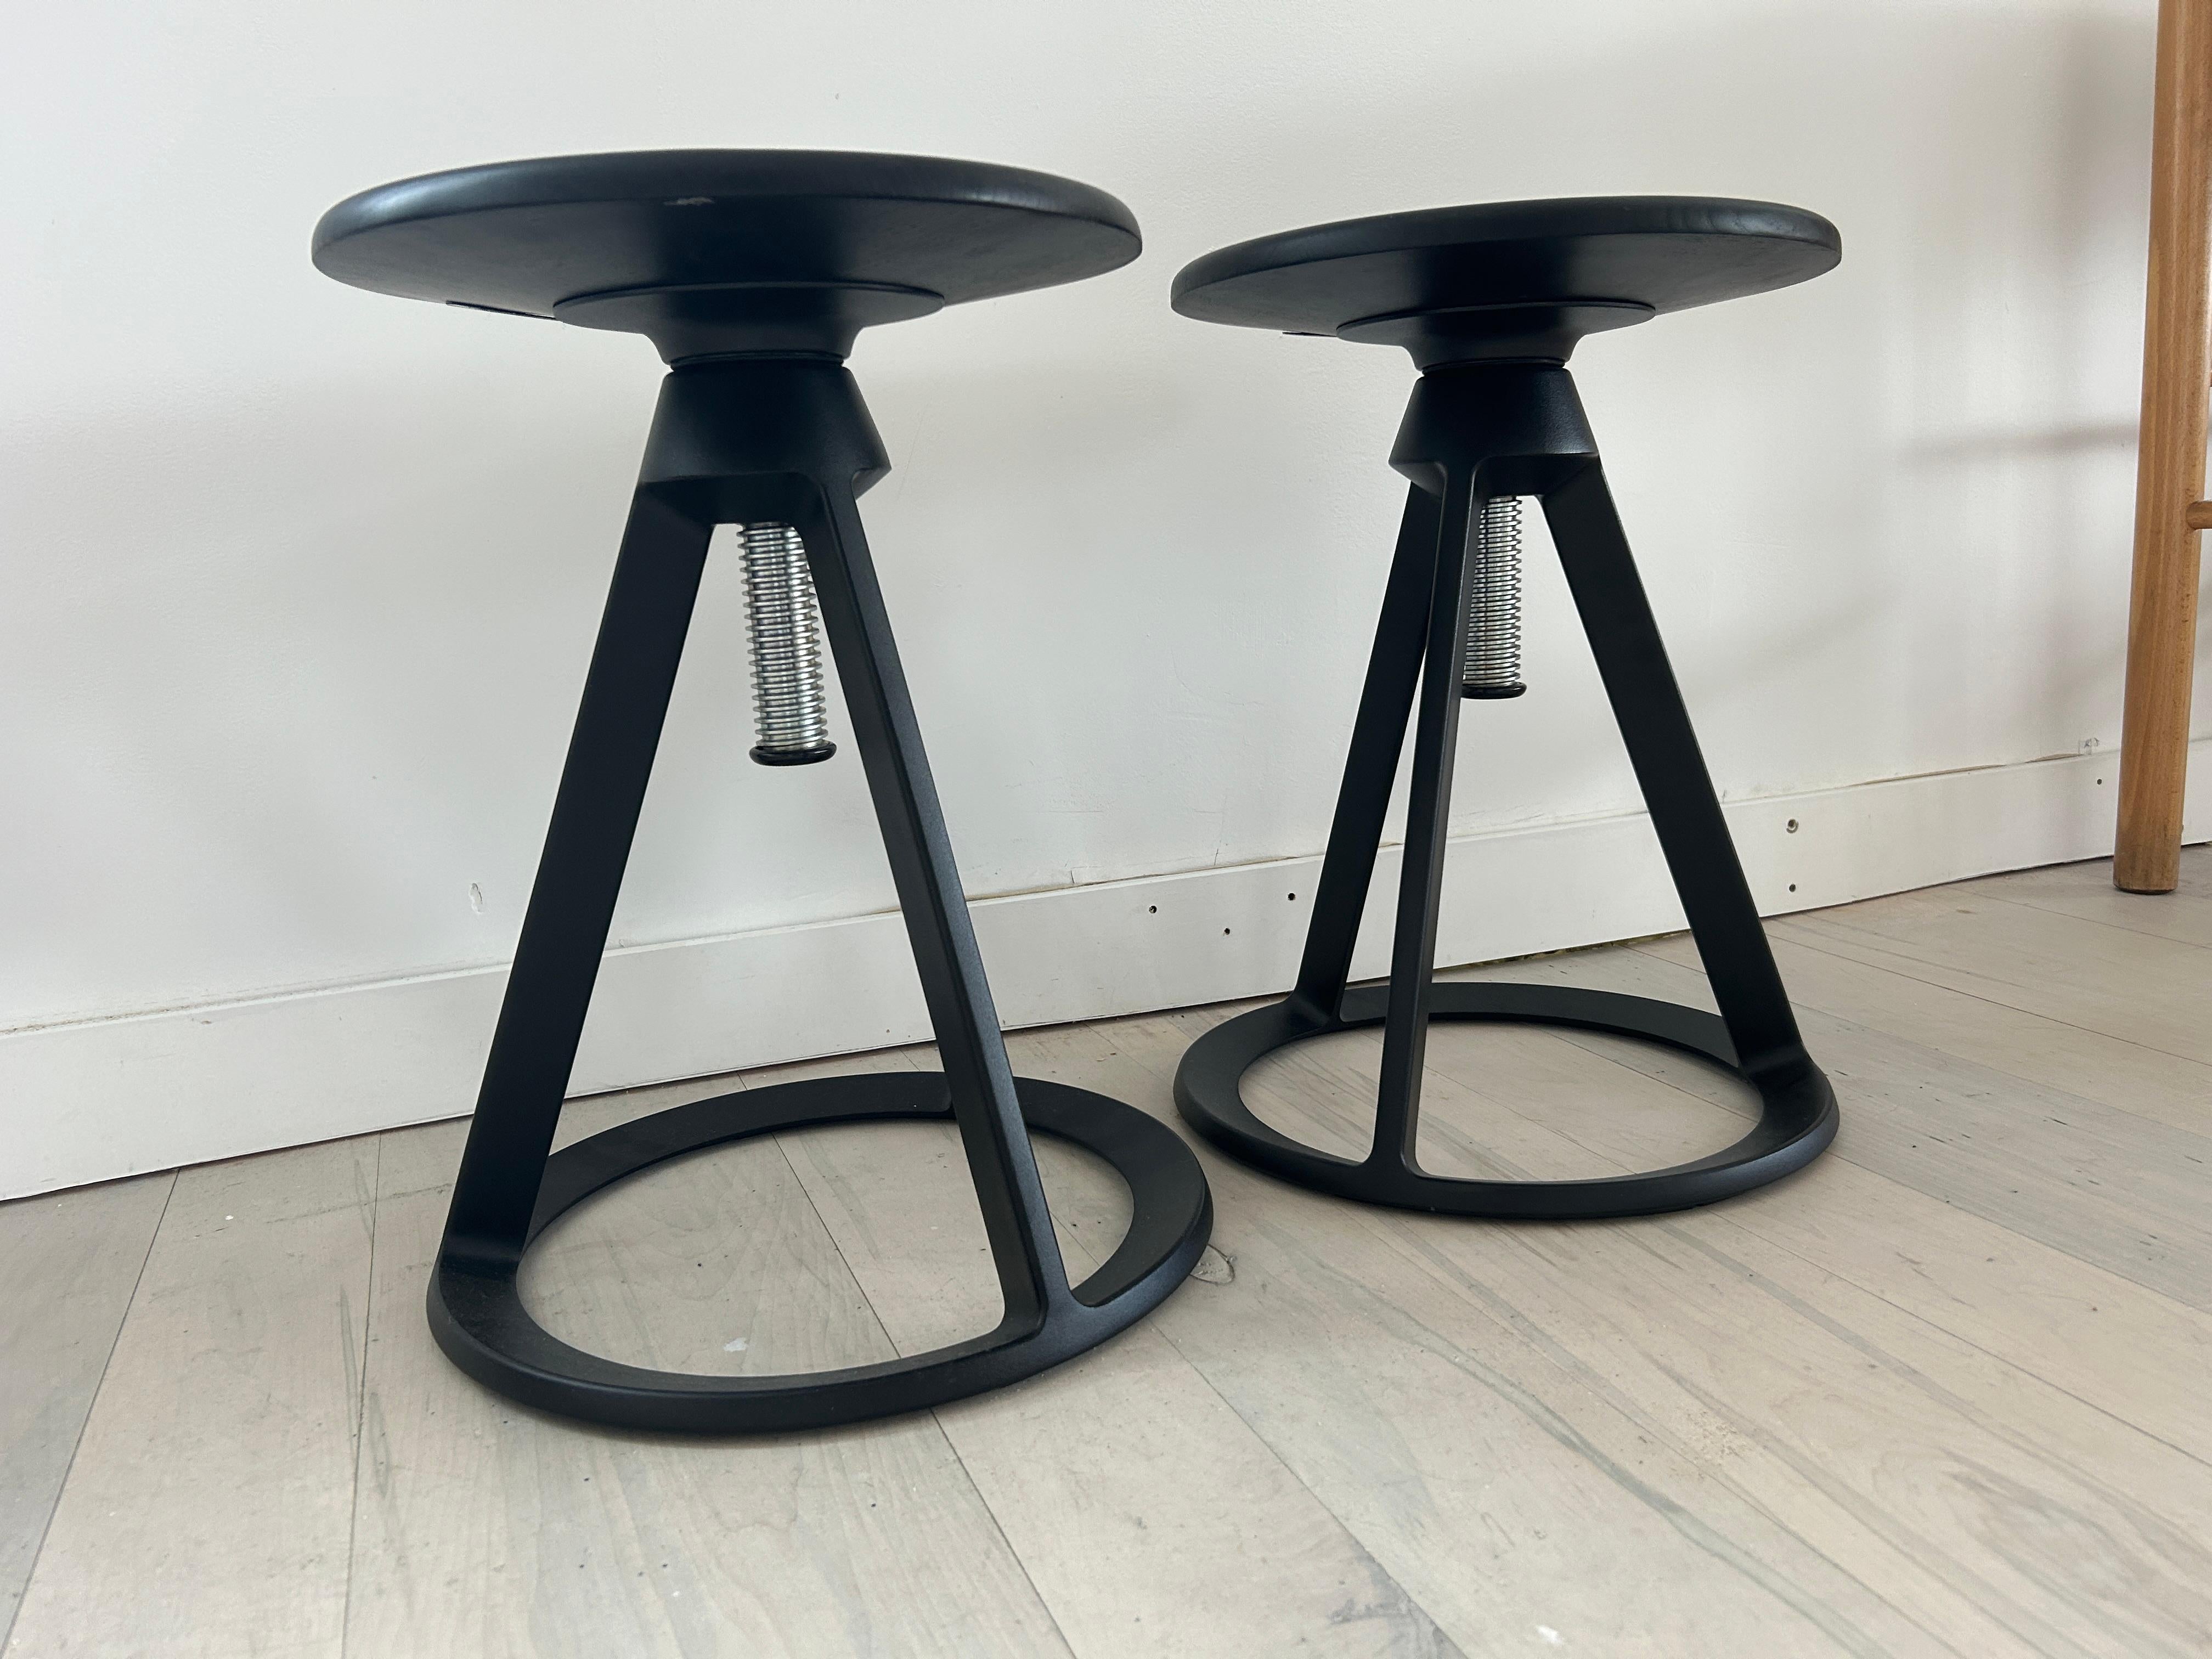 A pair of Modern Edward Barber and Jay Osgerby for Knoll Piton stools in Black.

Piton is a perfect pull-up option or full-time dining chair. The swiveling hardwood seat sits atop a cast-aluminum, powder coated base which is a unique